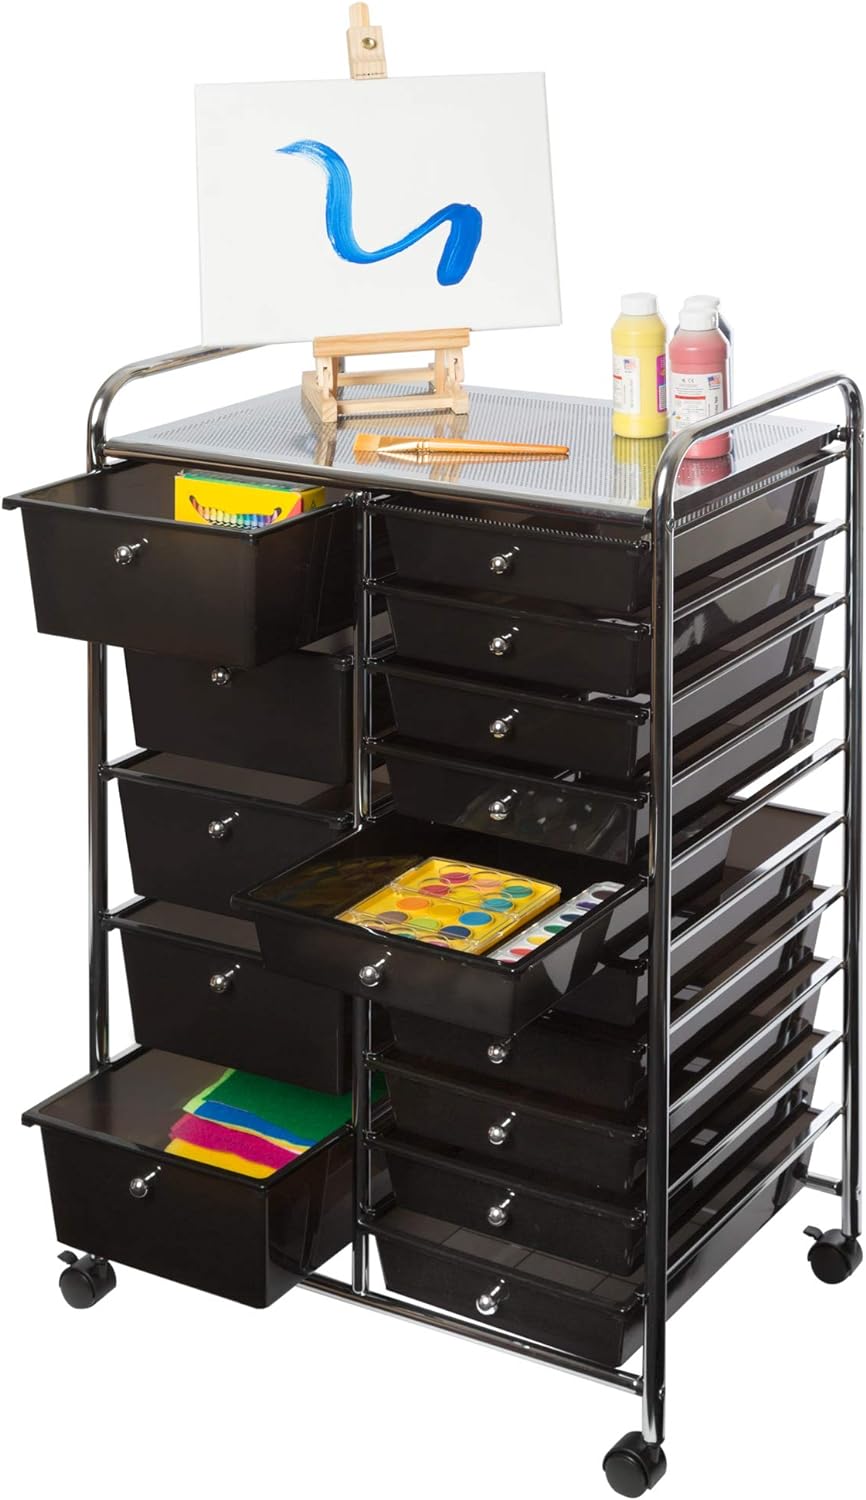 Seville Classics Rolling Utility Organizer Storage Cart for Home Office,  School, Classroom, Scrapbook, Hobby, Craft, 15 Drawer, Black